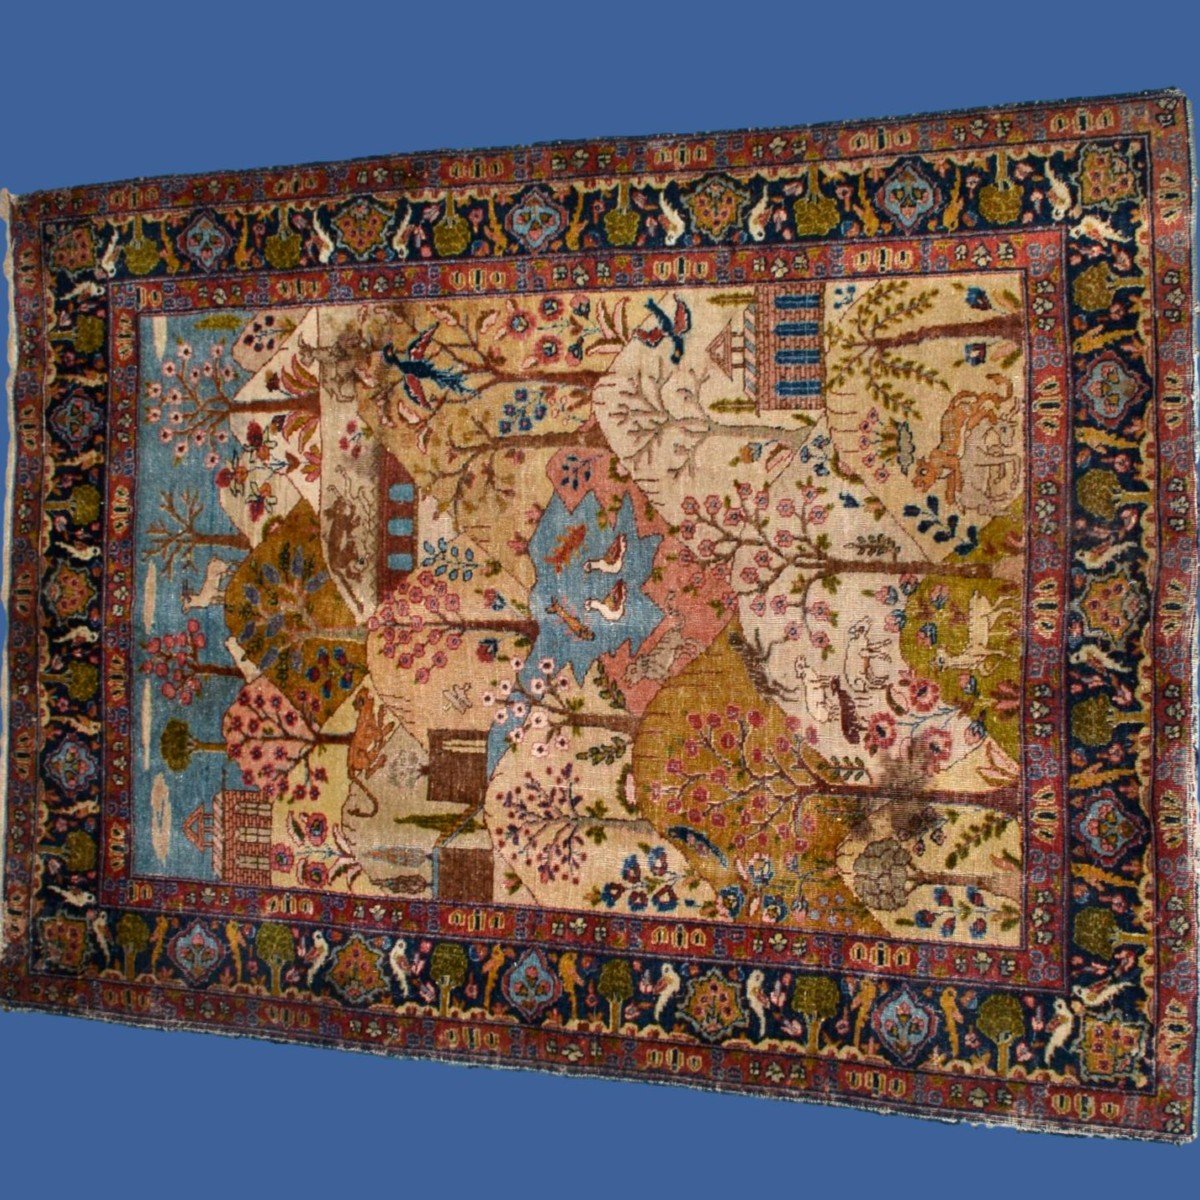 Painting Rug, Old Tabriz, 142 Cm X 188 Cm, Hand-knotted Wool In Persia, Iran Circa 1880 - 1900-photo-3